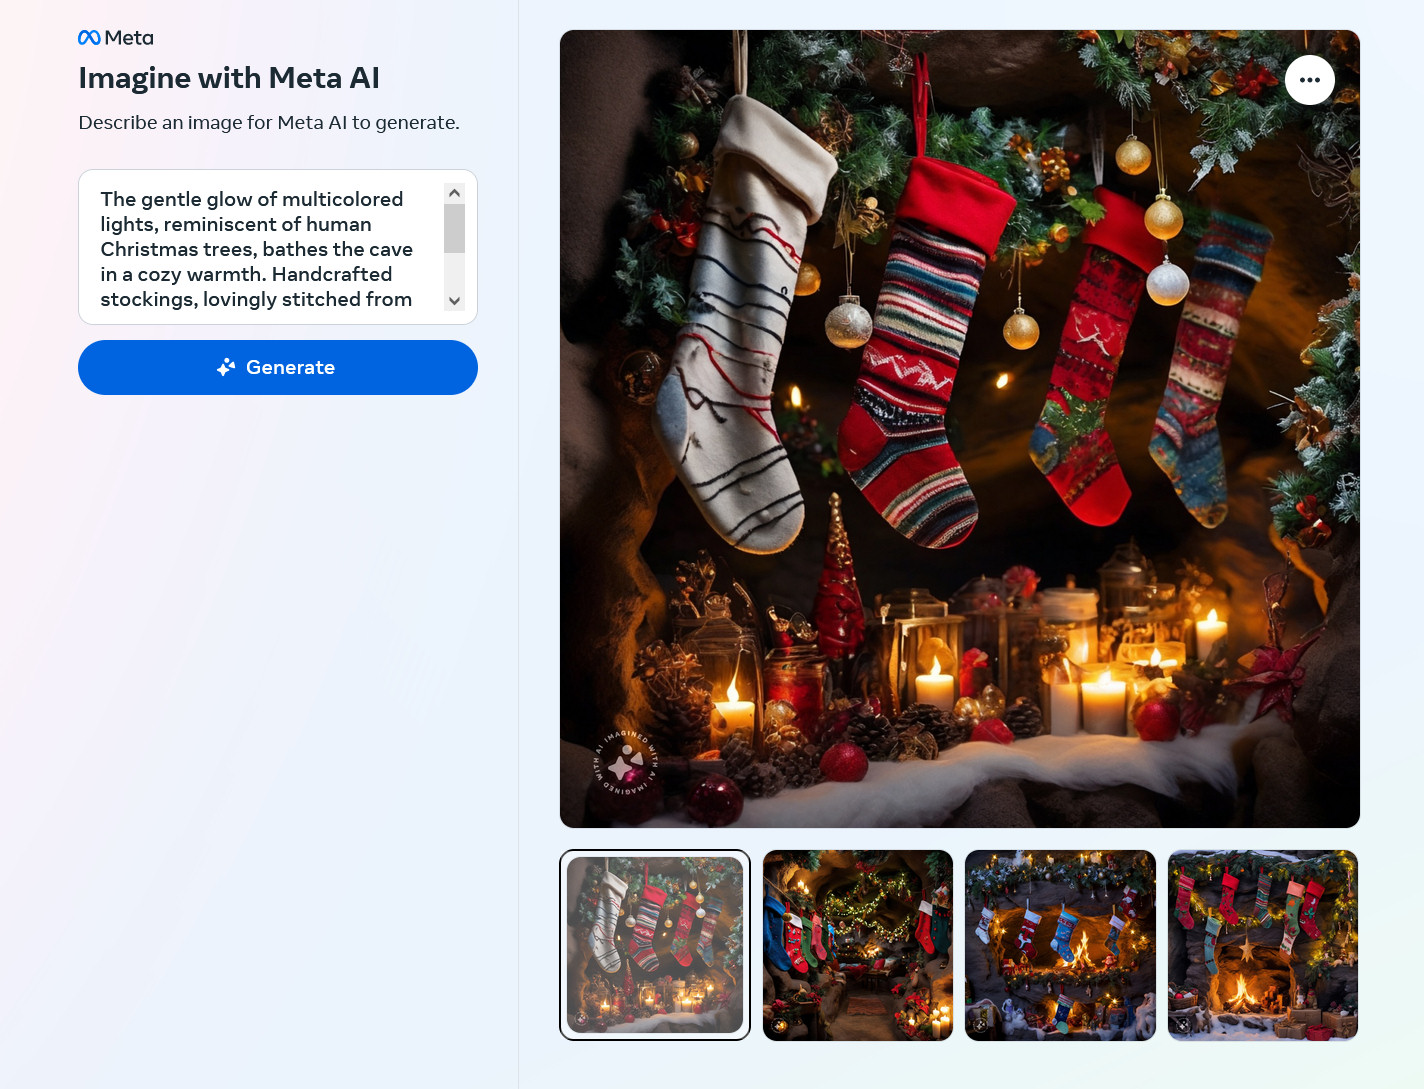 AI-generated images of a complex prompt involving Christmas stockings and a cave created by Meta Emu on the Imagine with Meta AI website.